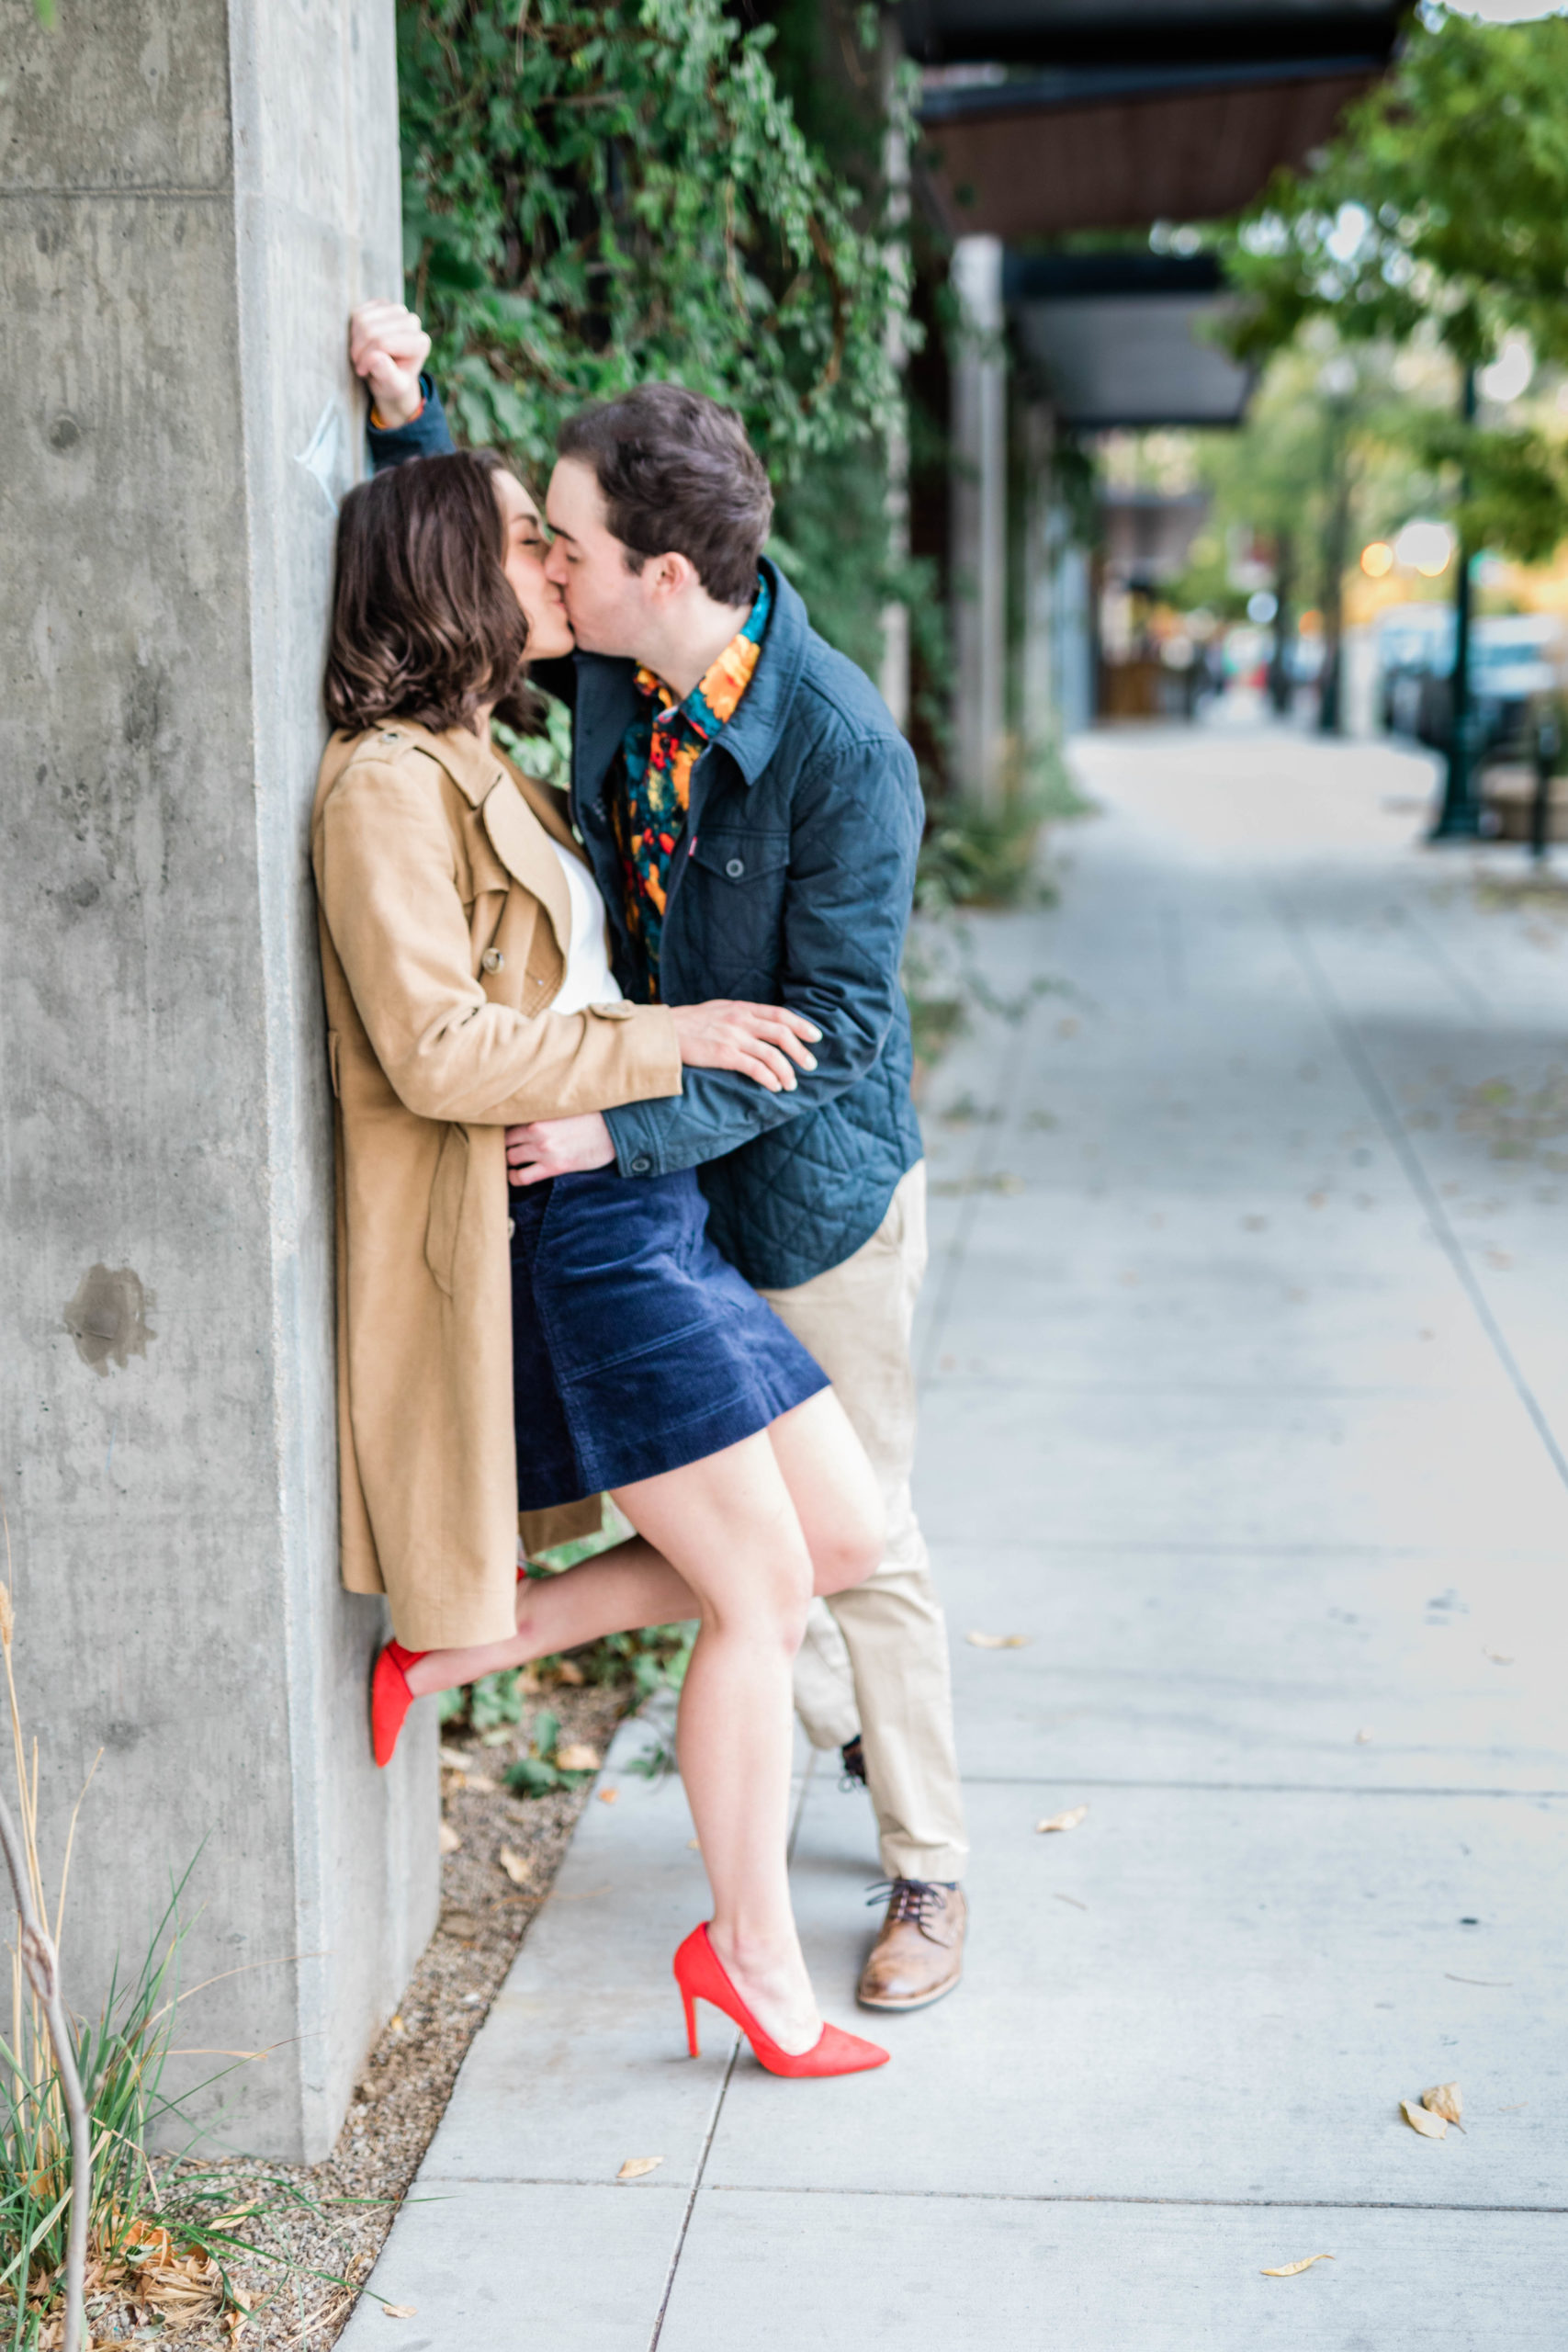 Boise wedding photographer captures man and woman kissing against wall during downtown boise engagements